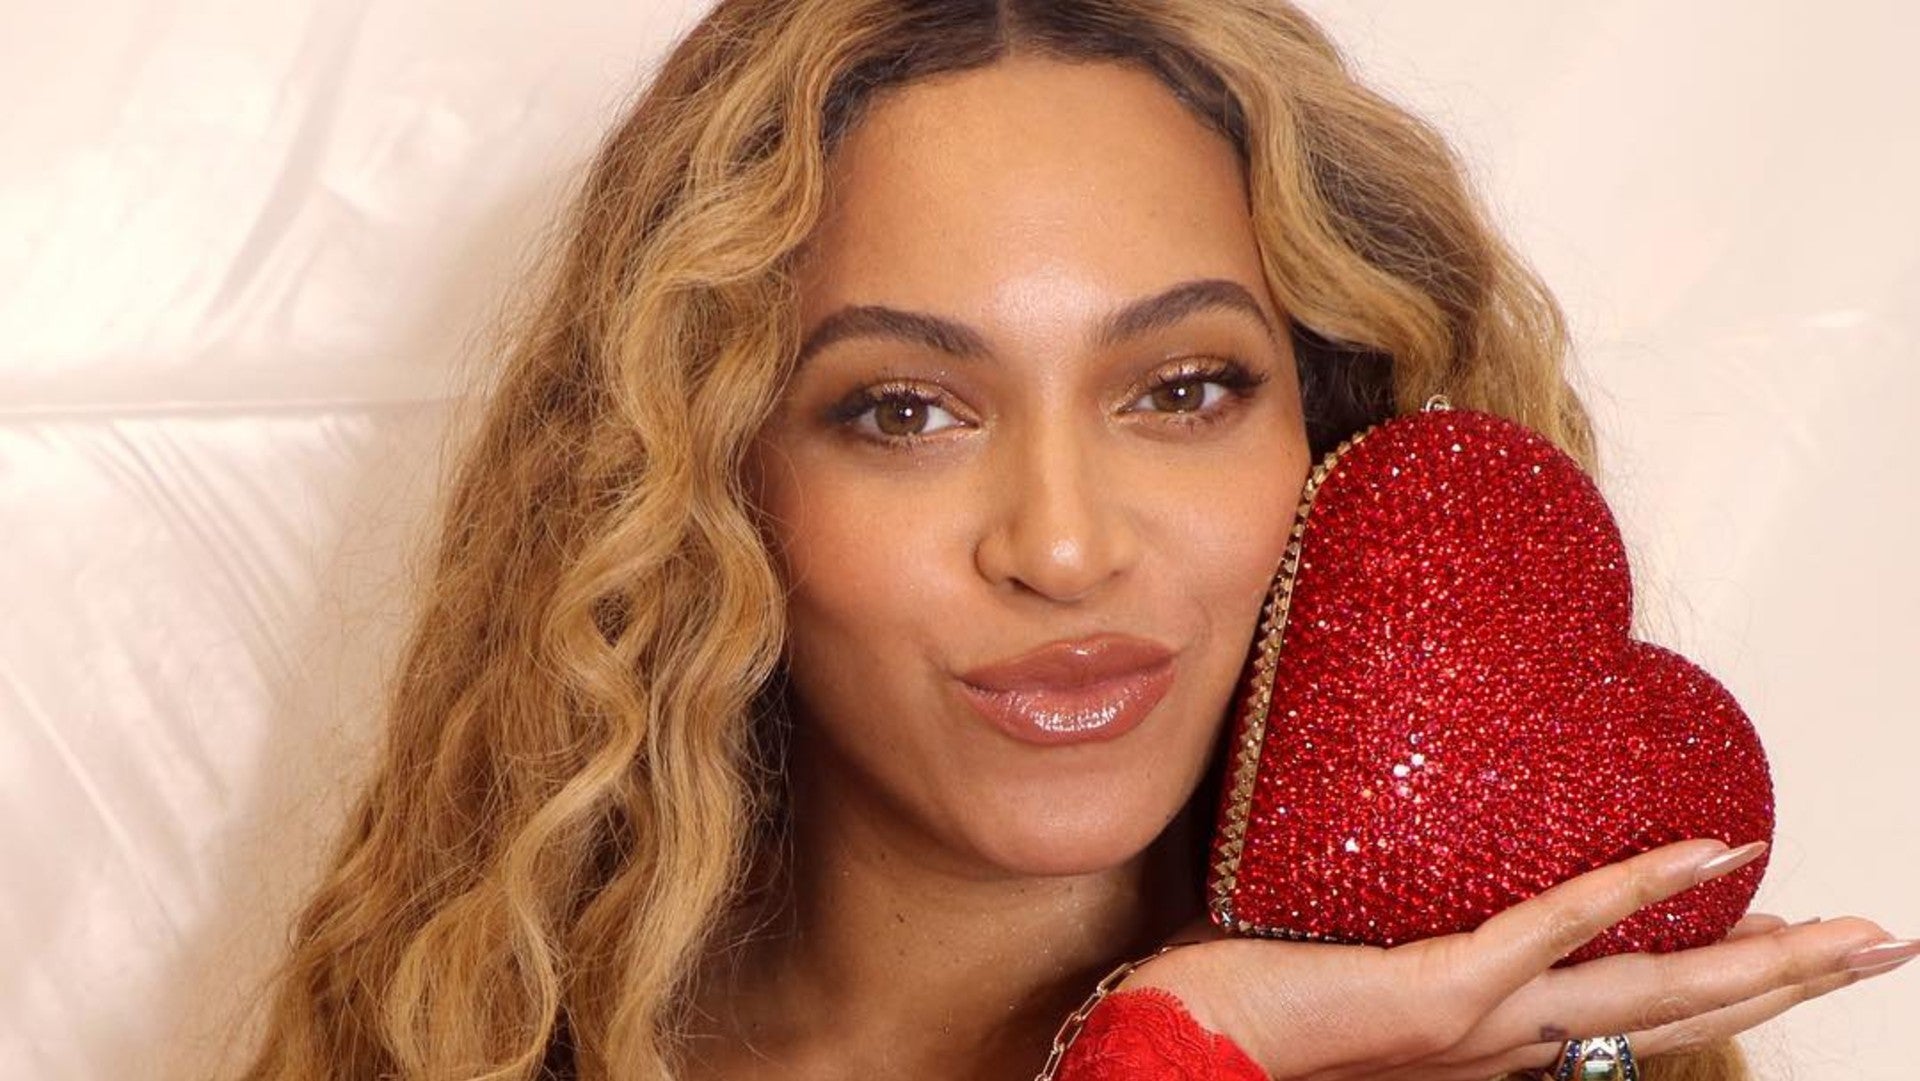 Beyoncé Goes Back To Blond With A New Hairdo